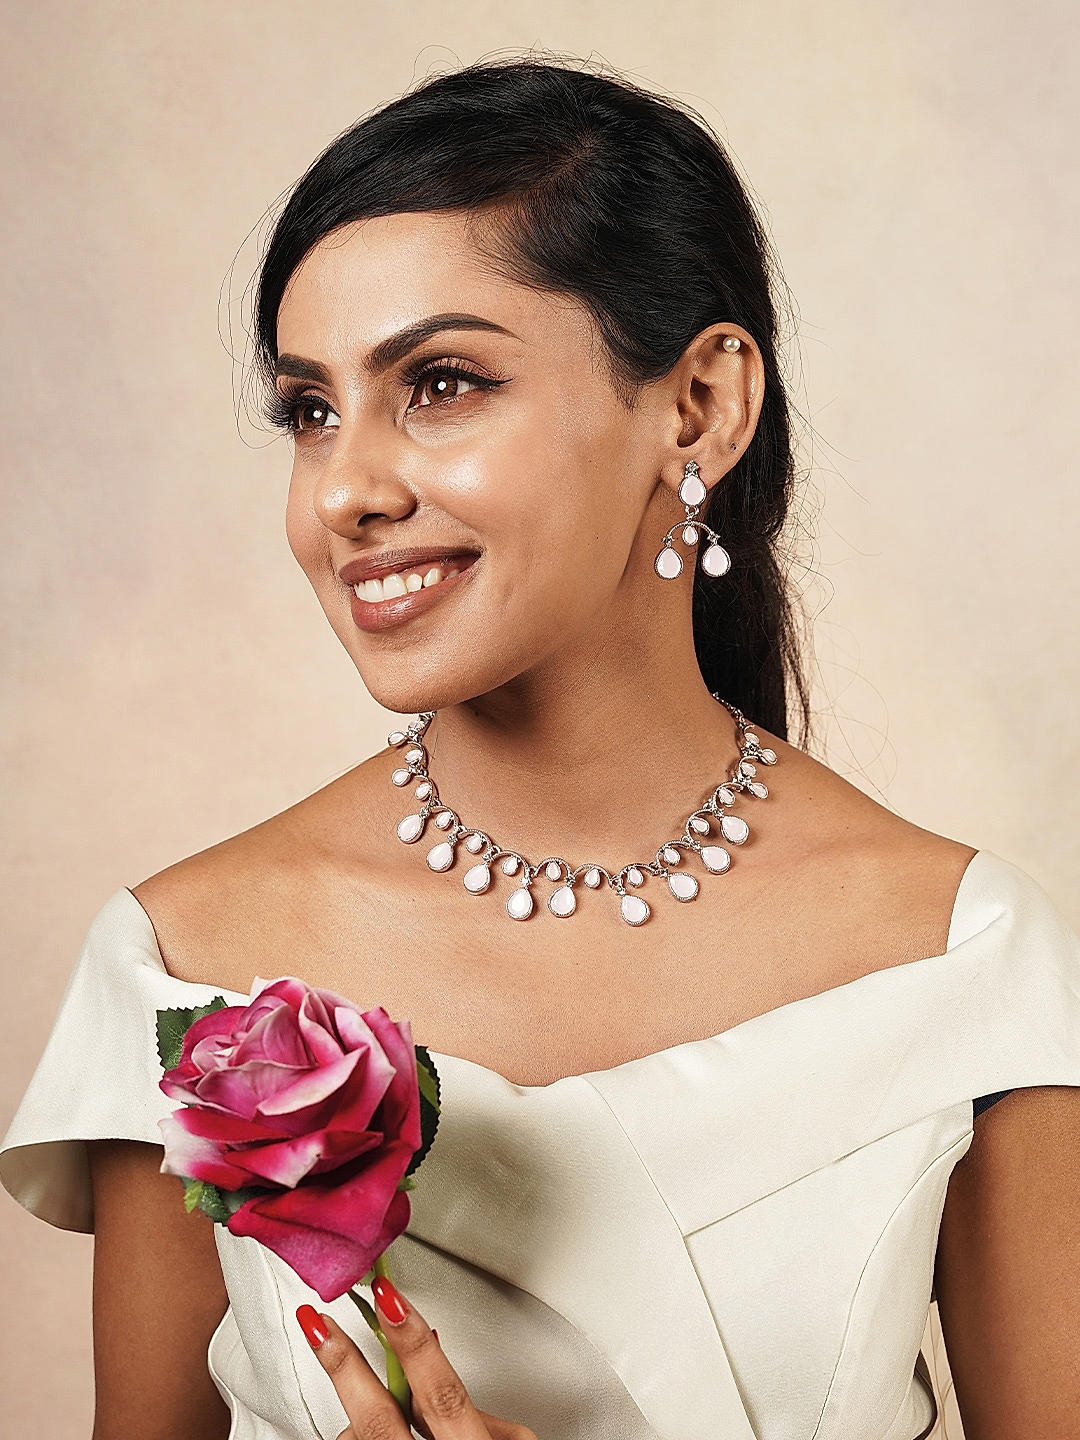 Gorgeous Florial AD Pearl Necklace Set